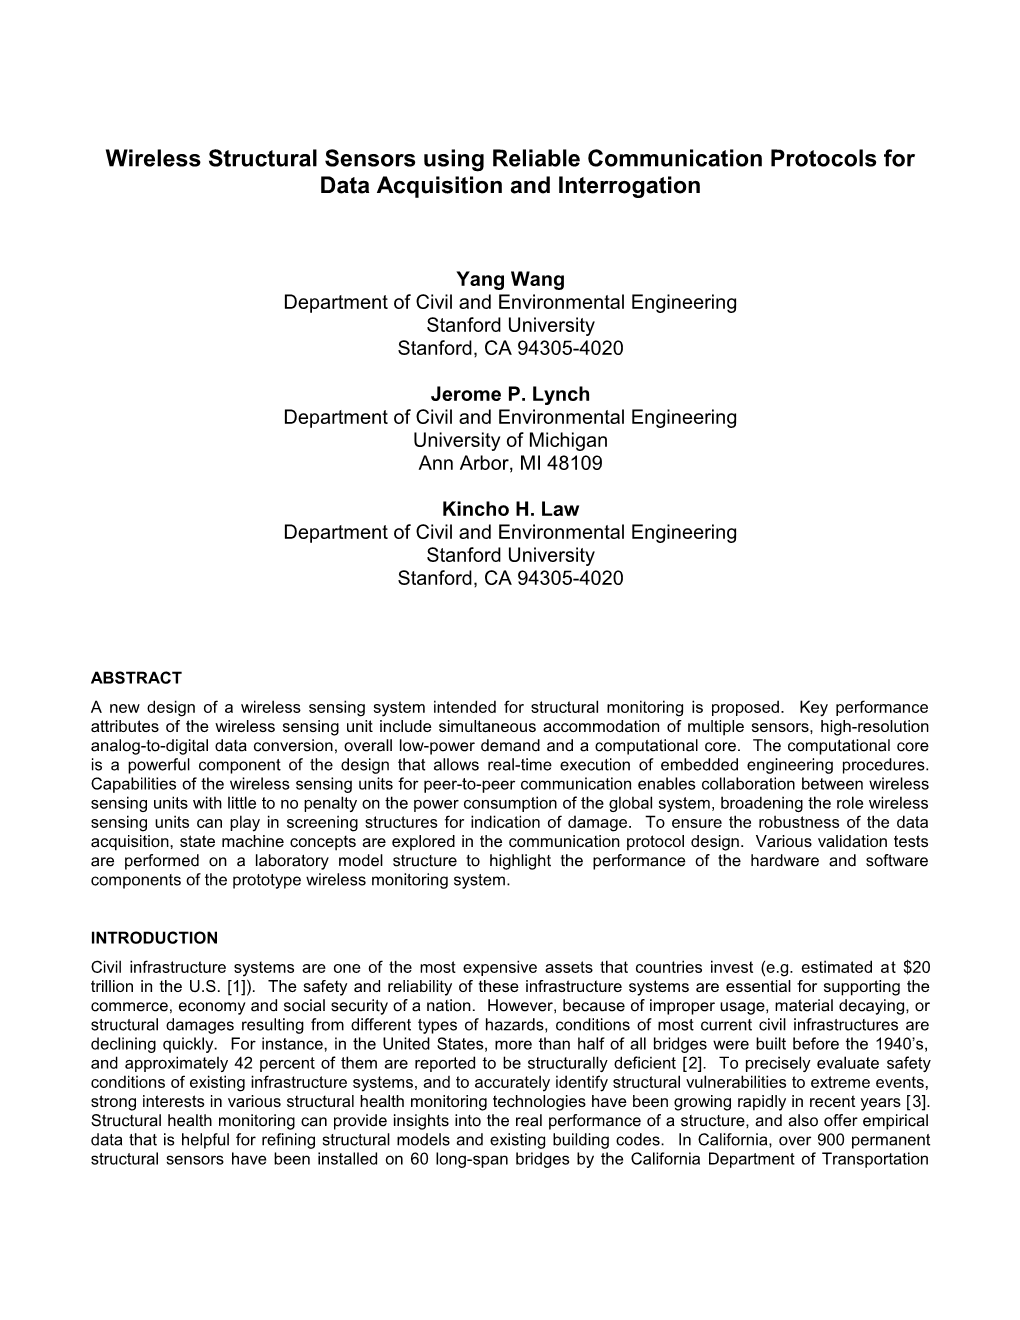 Title: Wireless Structural Sensors Using Peer-To-Peer Communication Protocols For